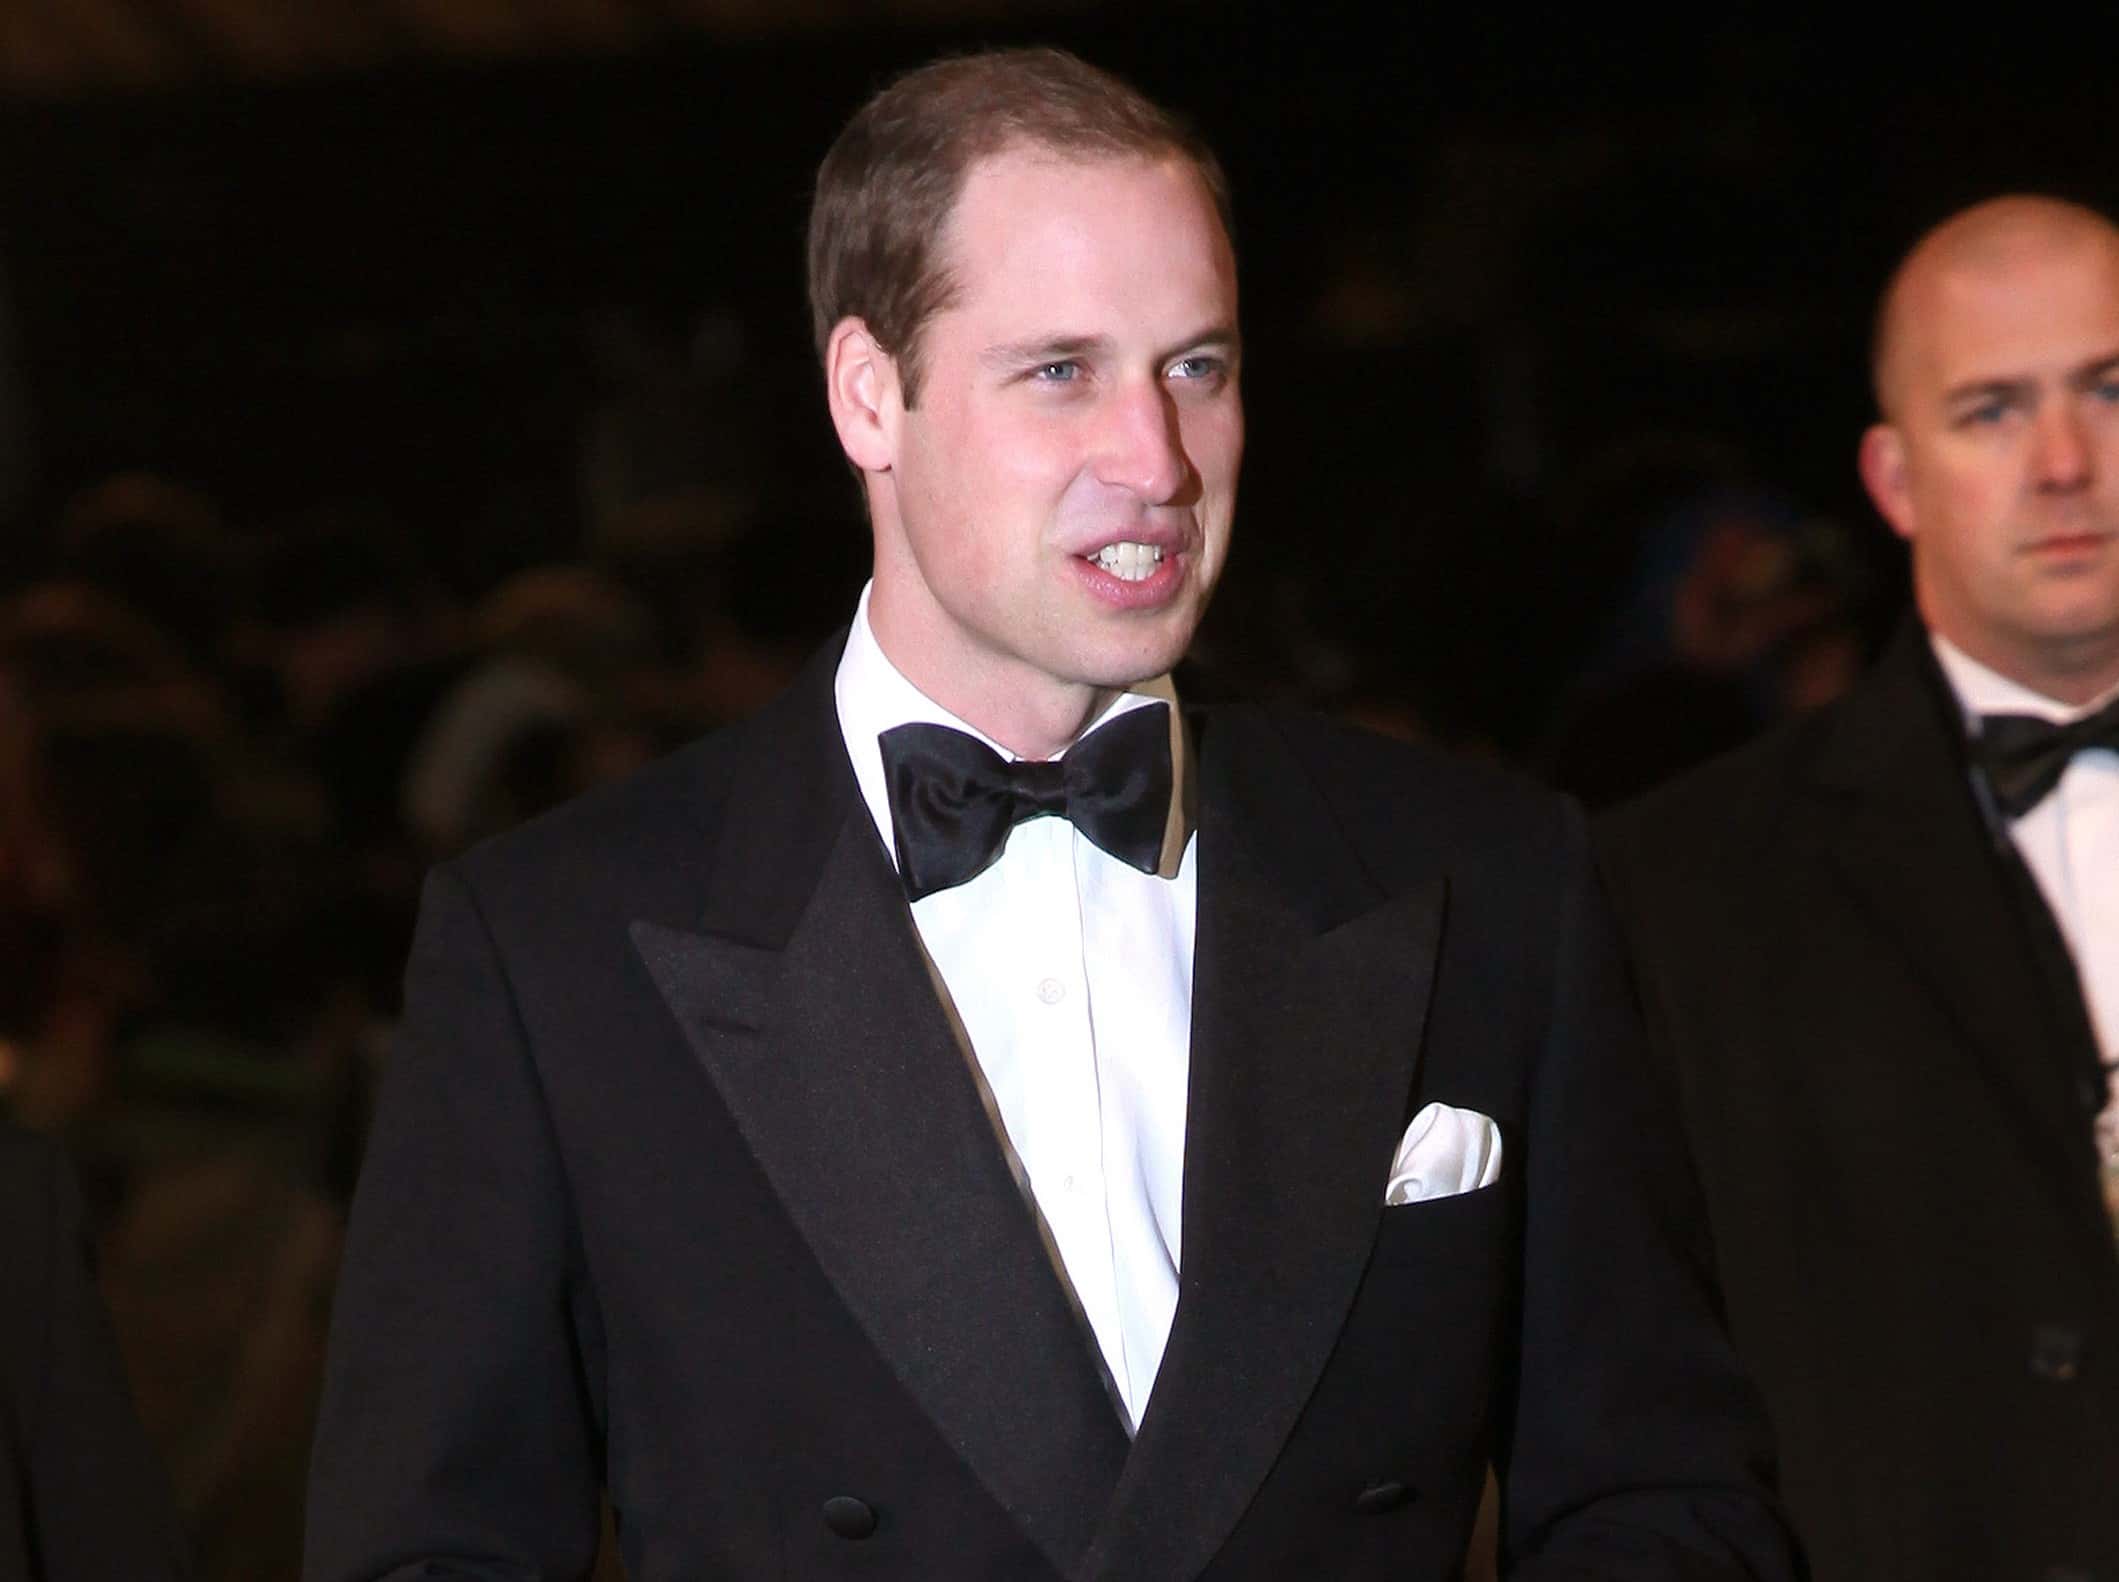 Prince William Facts